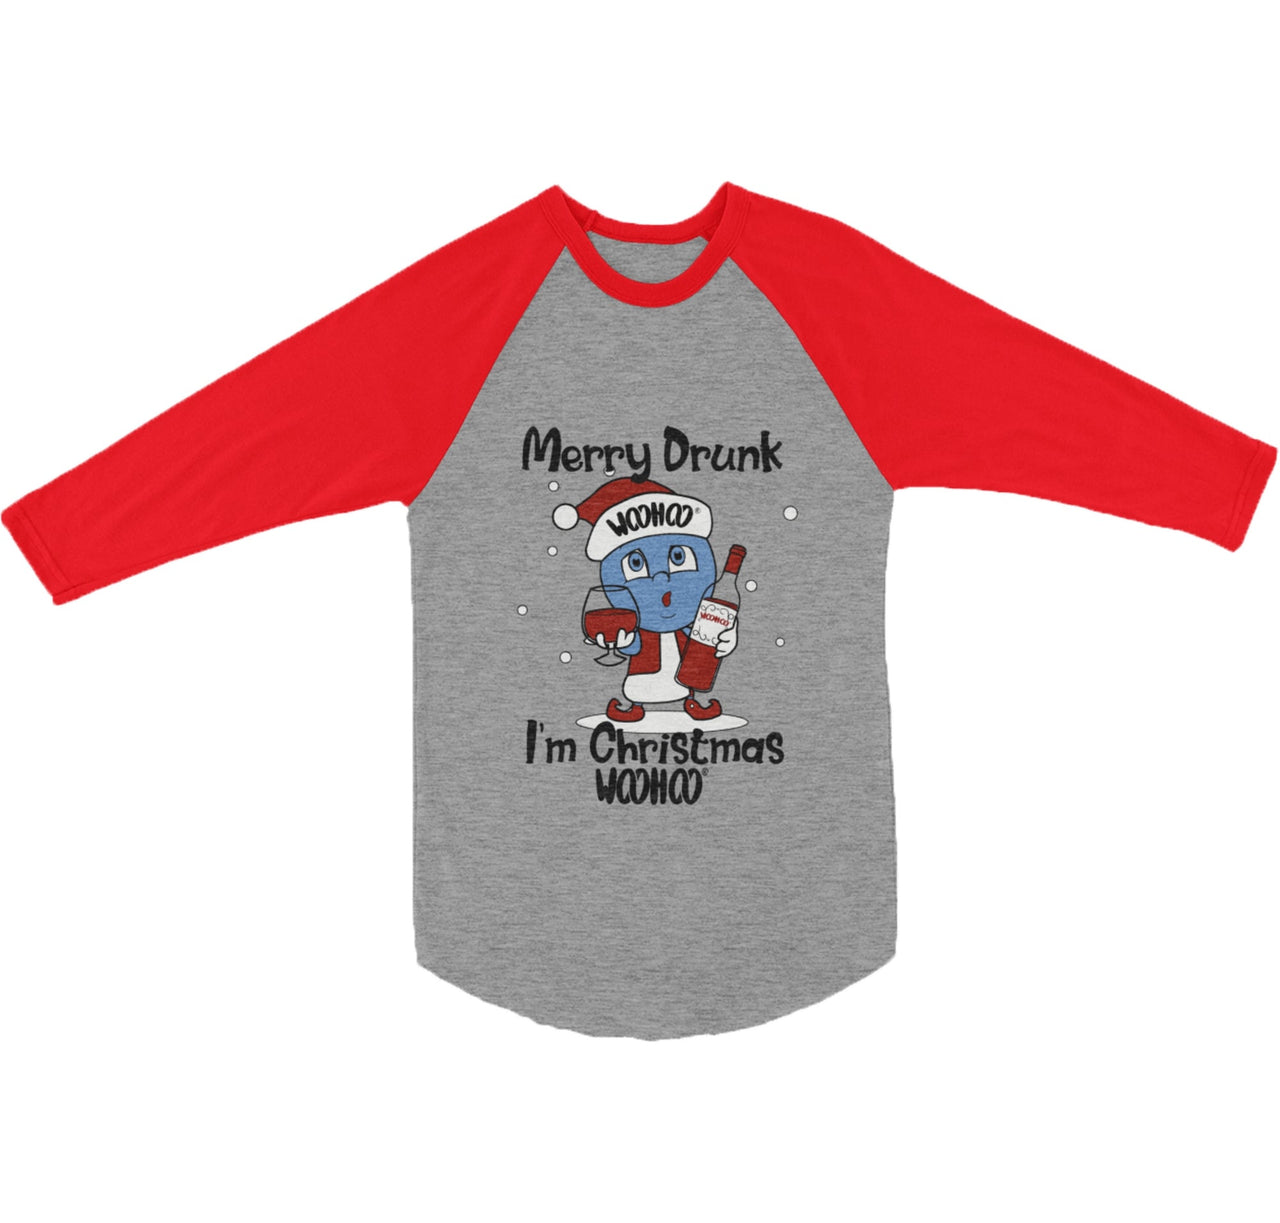 Raglan 3/4 red sleeve T-shirt featuring the text 'Merry Drunk I'm Christmas Woohoo,' designed by WooHoo Apparel. The design includes Woohooberry dressed in an elf outfit, holding a wine bottle and wine glass